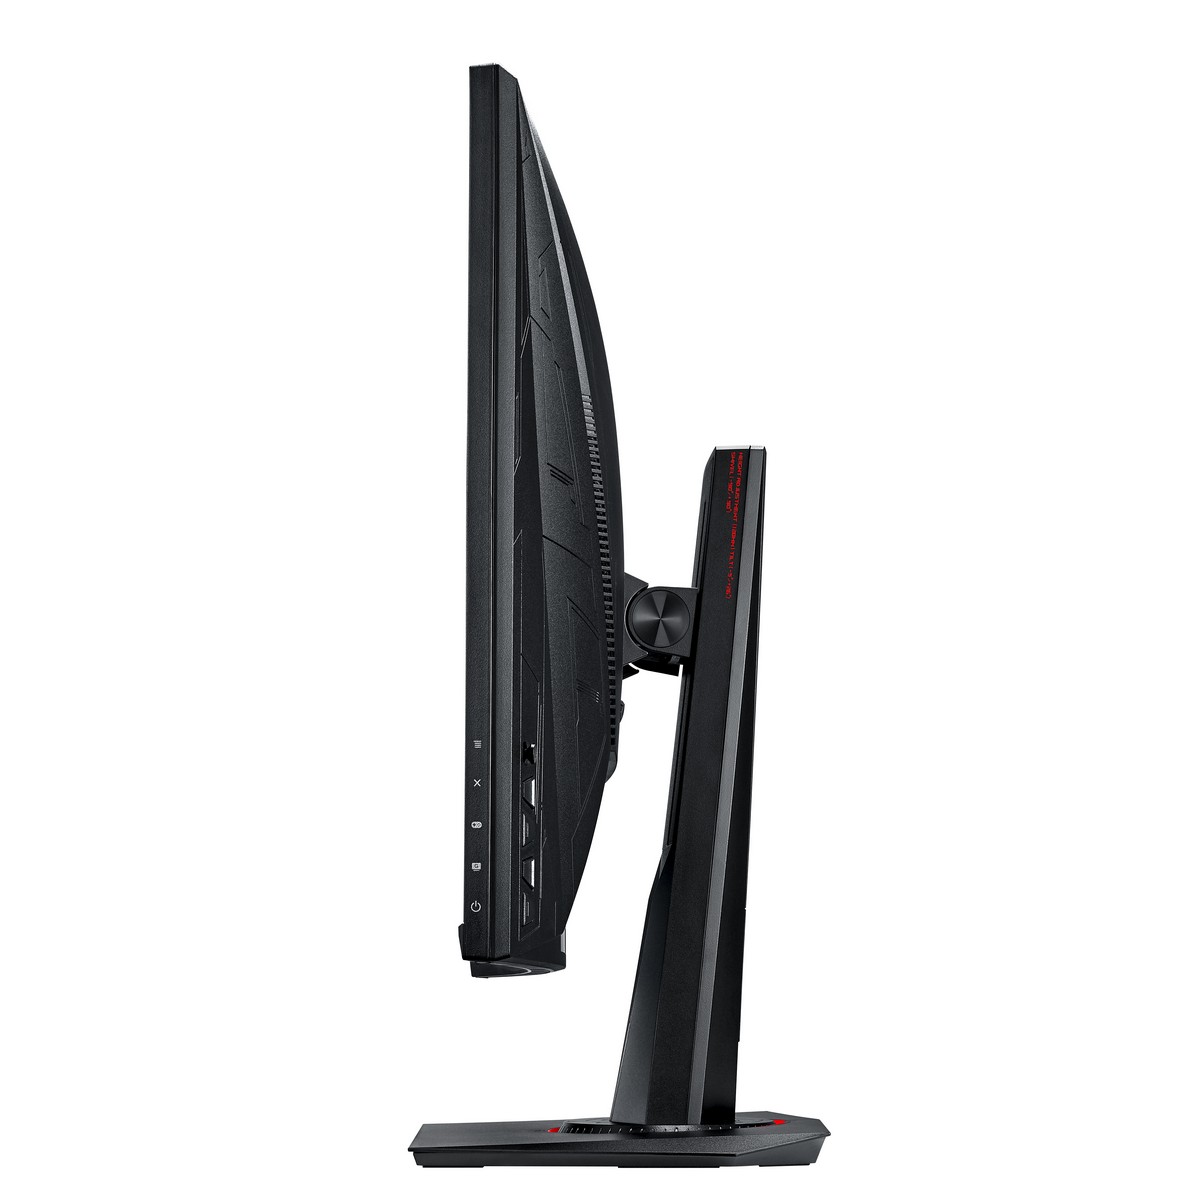 ASUS 27" TUF Gaming VG27VQ 1920x1080 VA 165Hz 1ms FreeSync Curved Widescreen Gaming Monitor